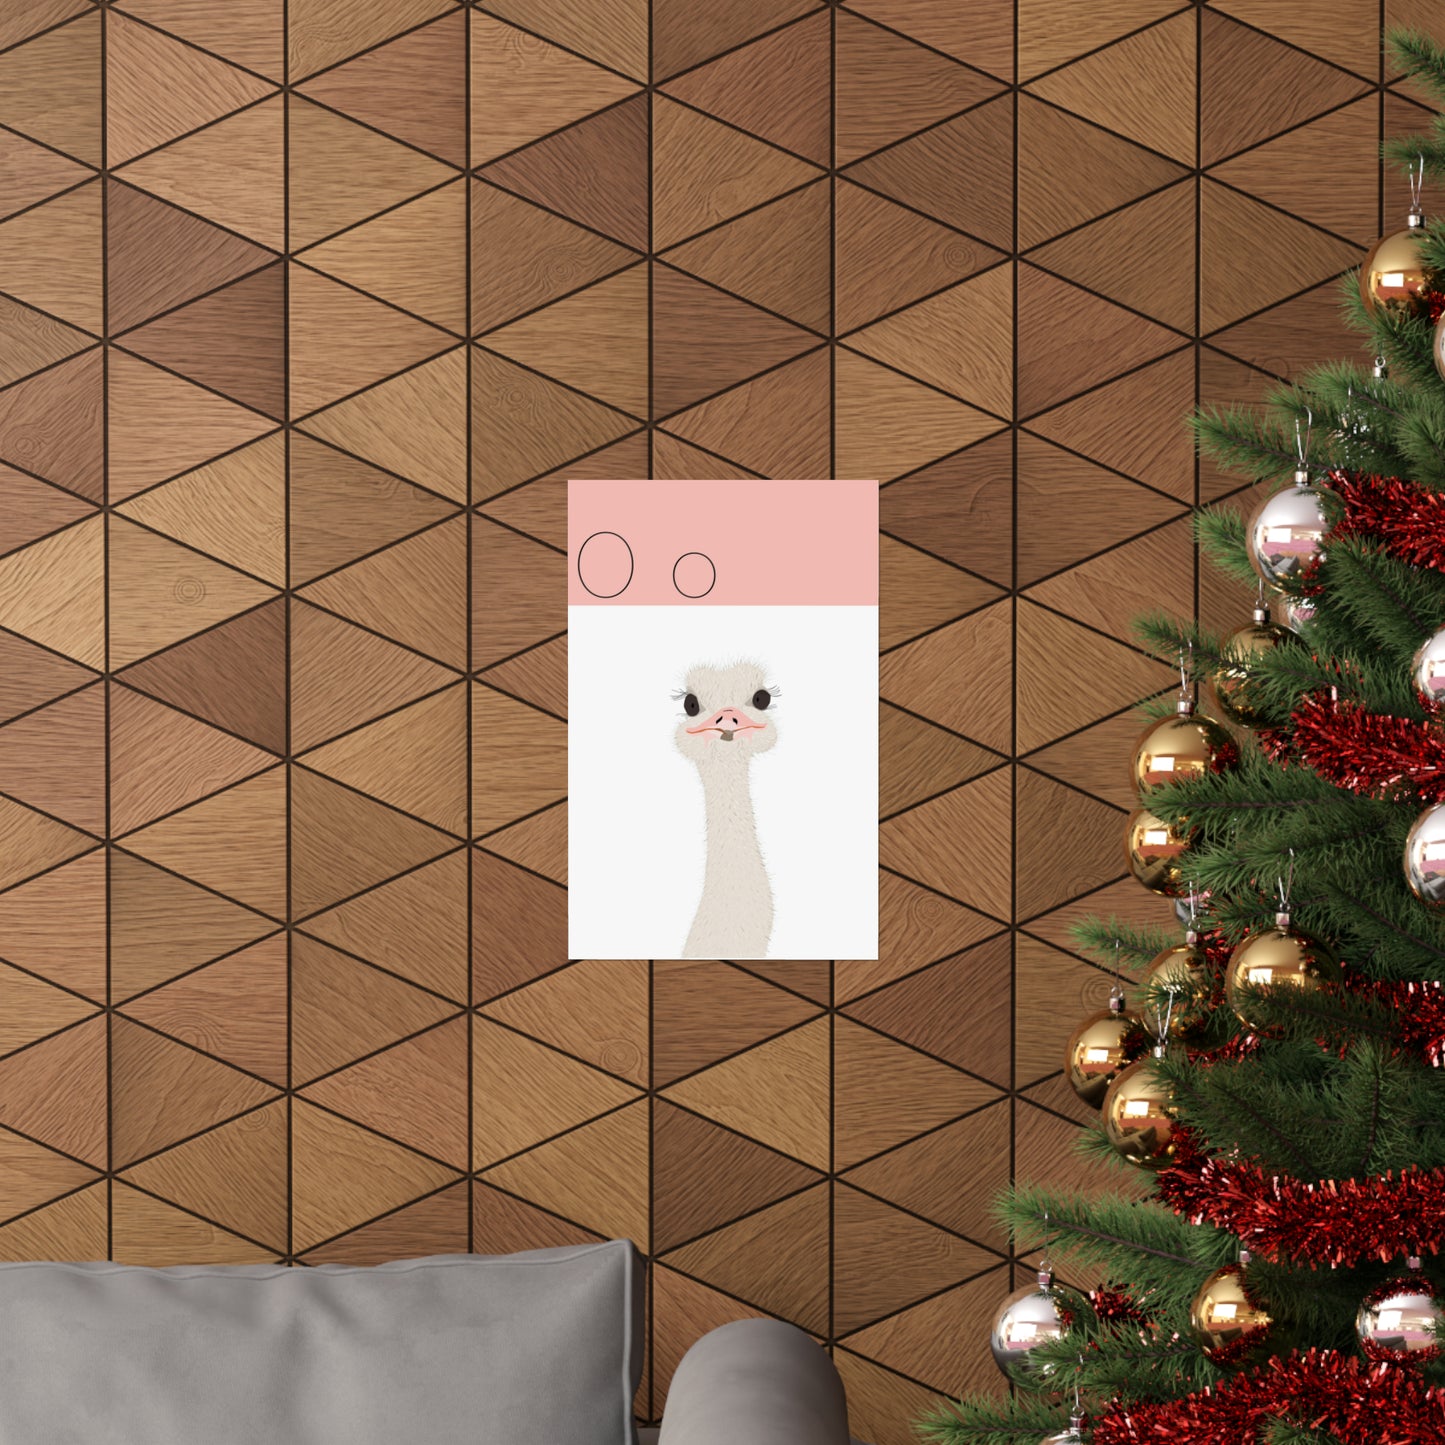 Ostrich Poster on Wooden Wall Beside Christmas Tree